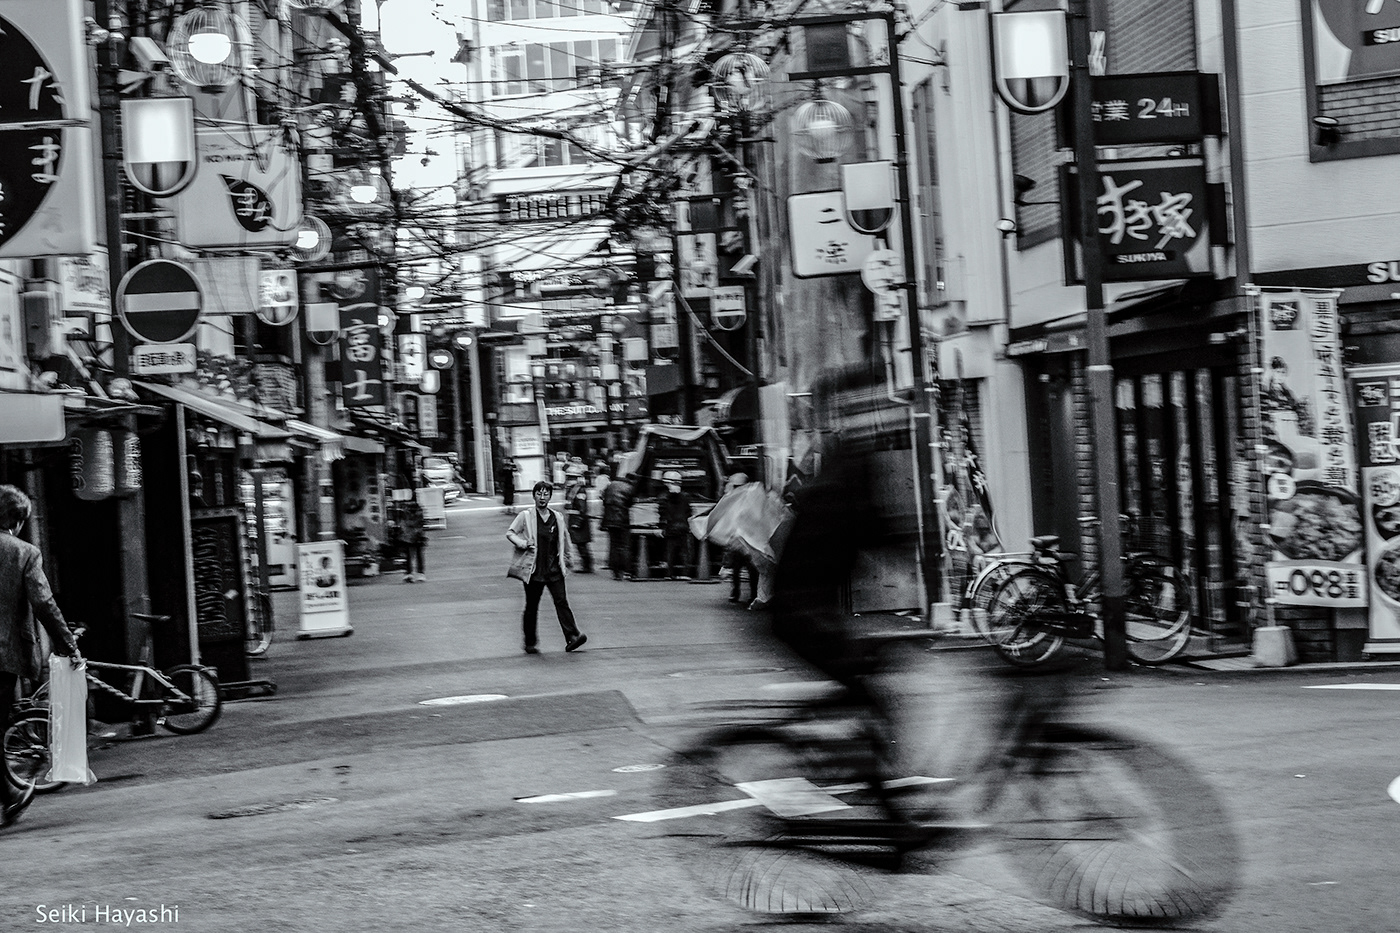 Street streetphotography black and whie city monochrome japan